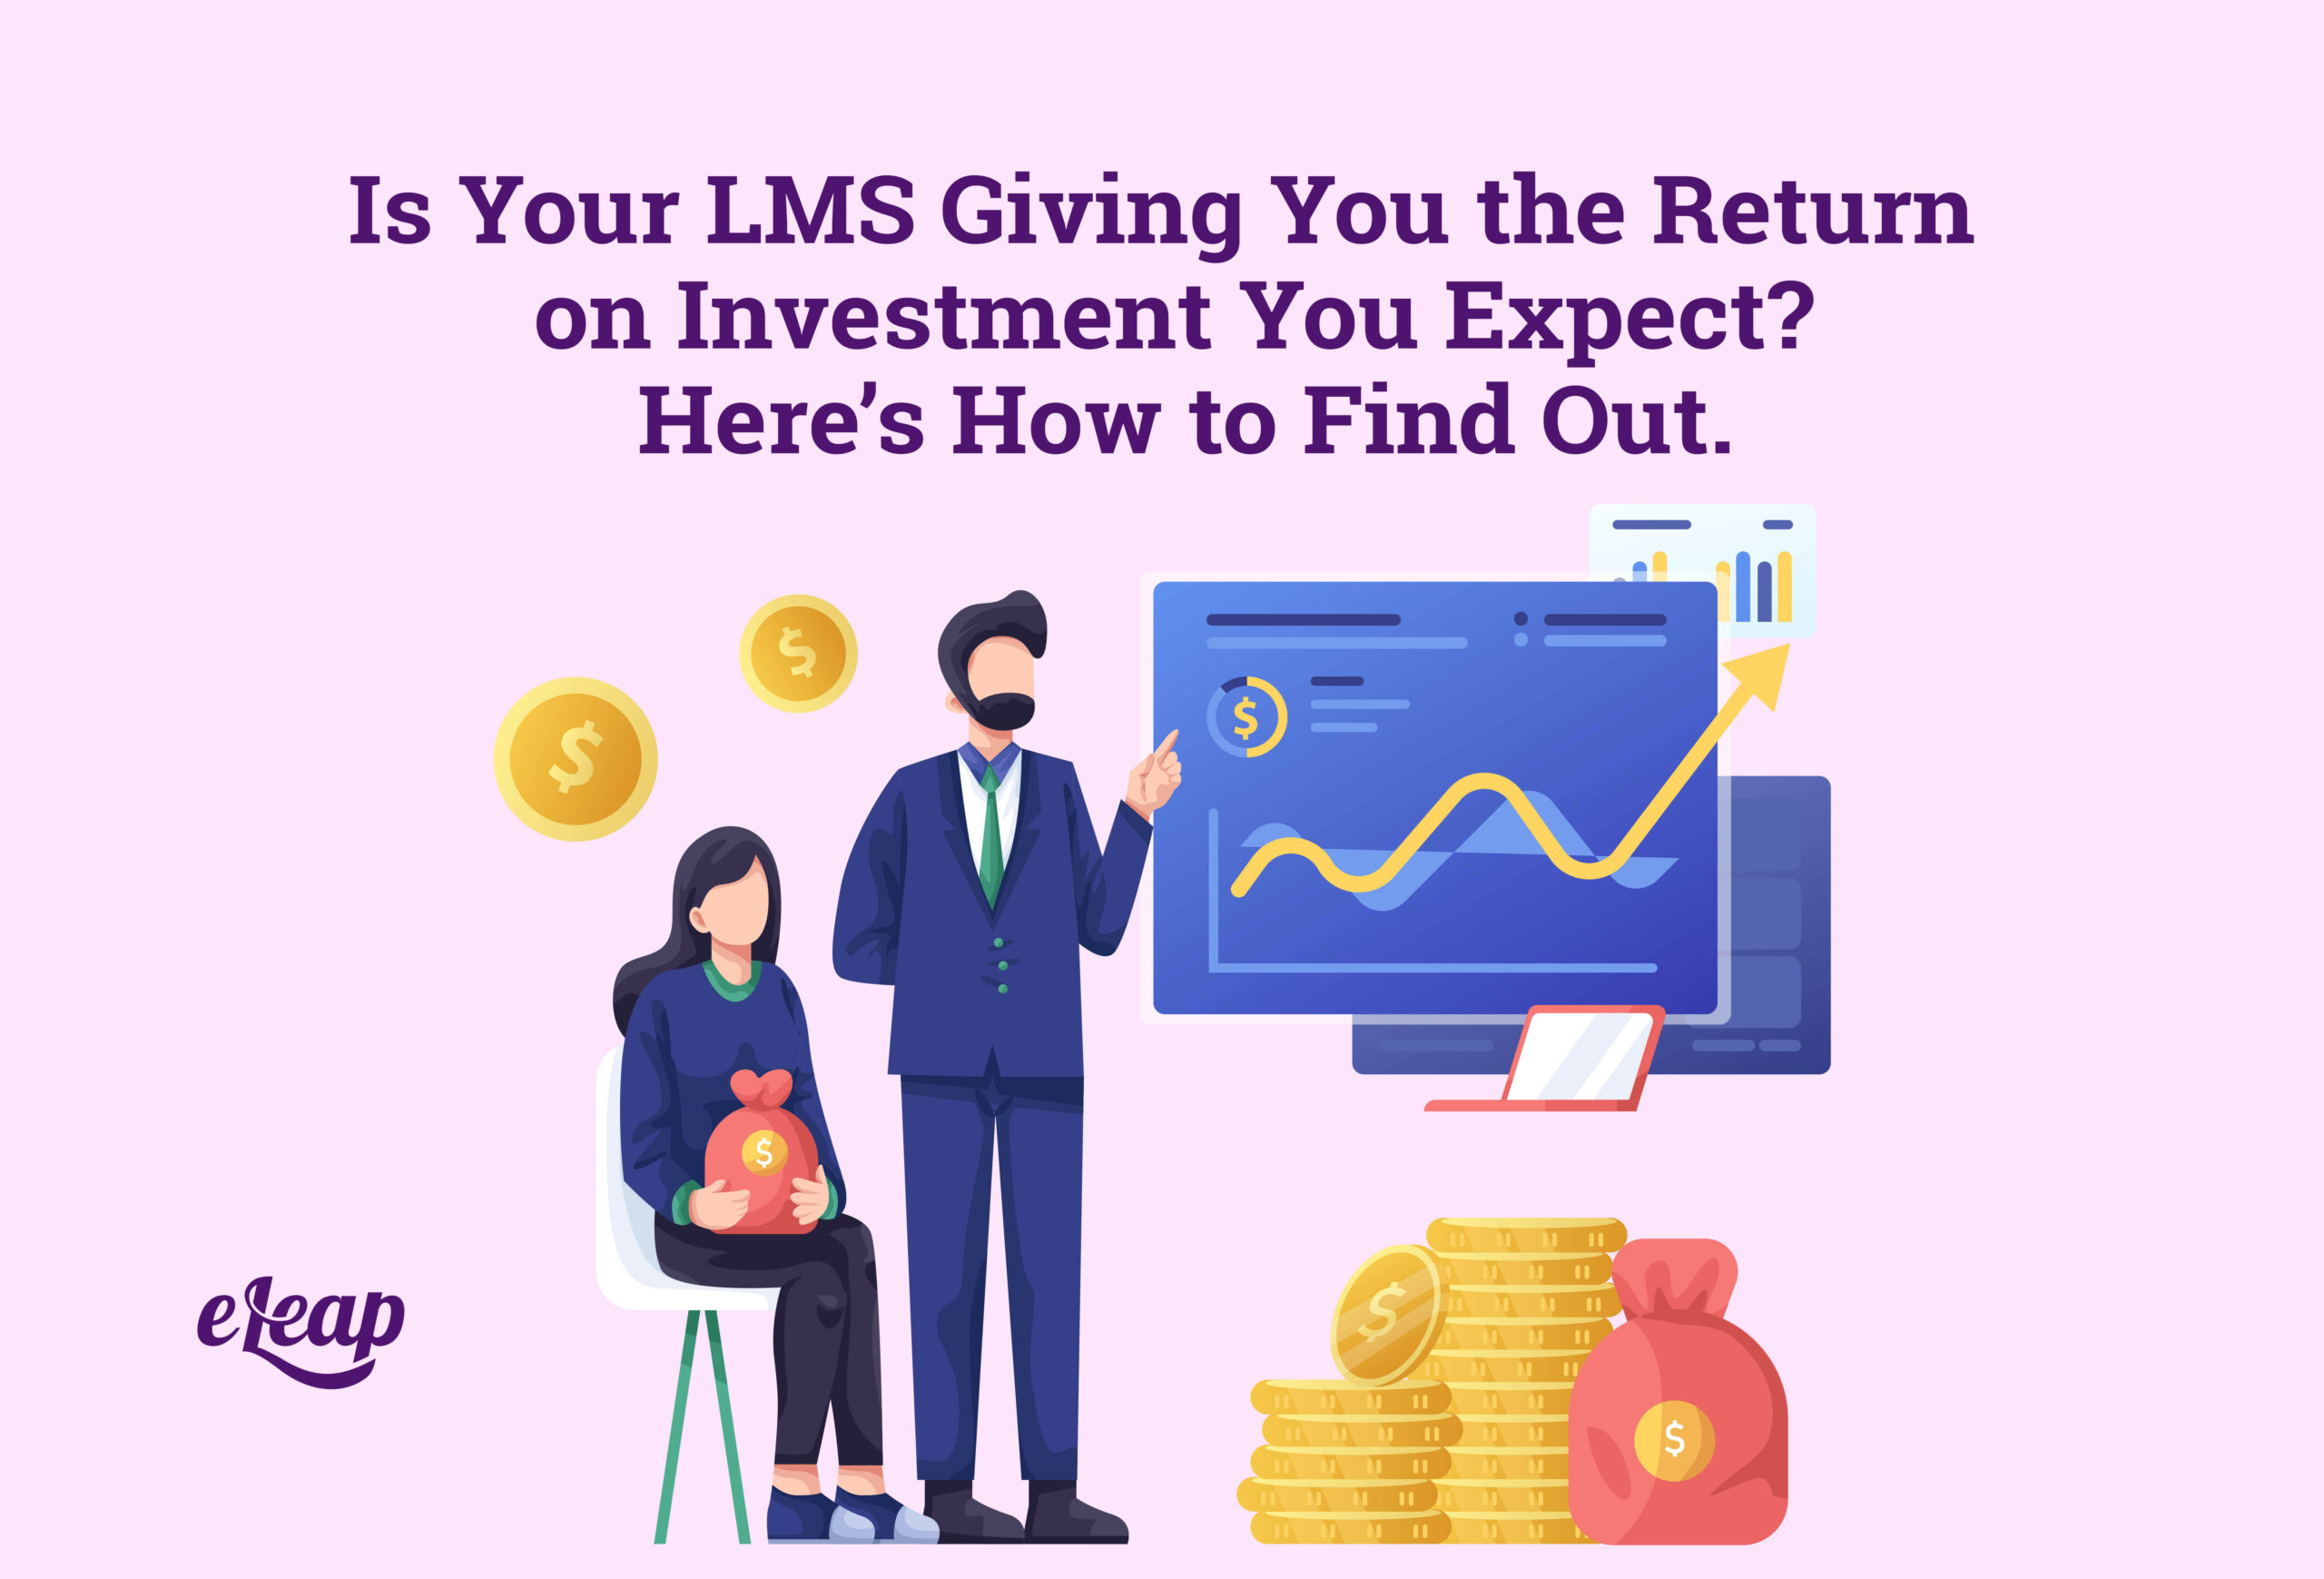 Is Your LMS Giving You the Return on Investment You Expect? Here’s How to Find Out.